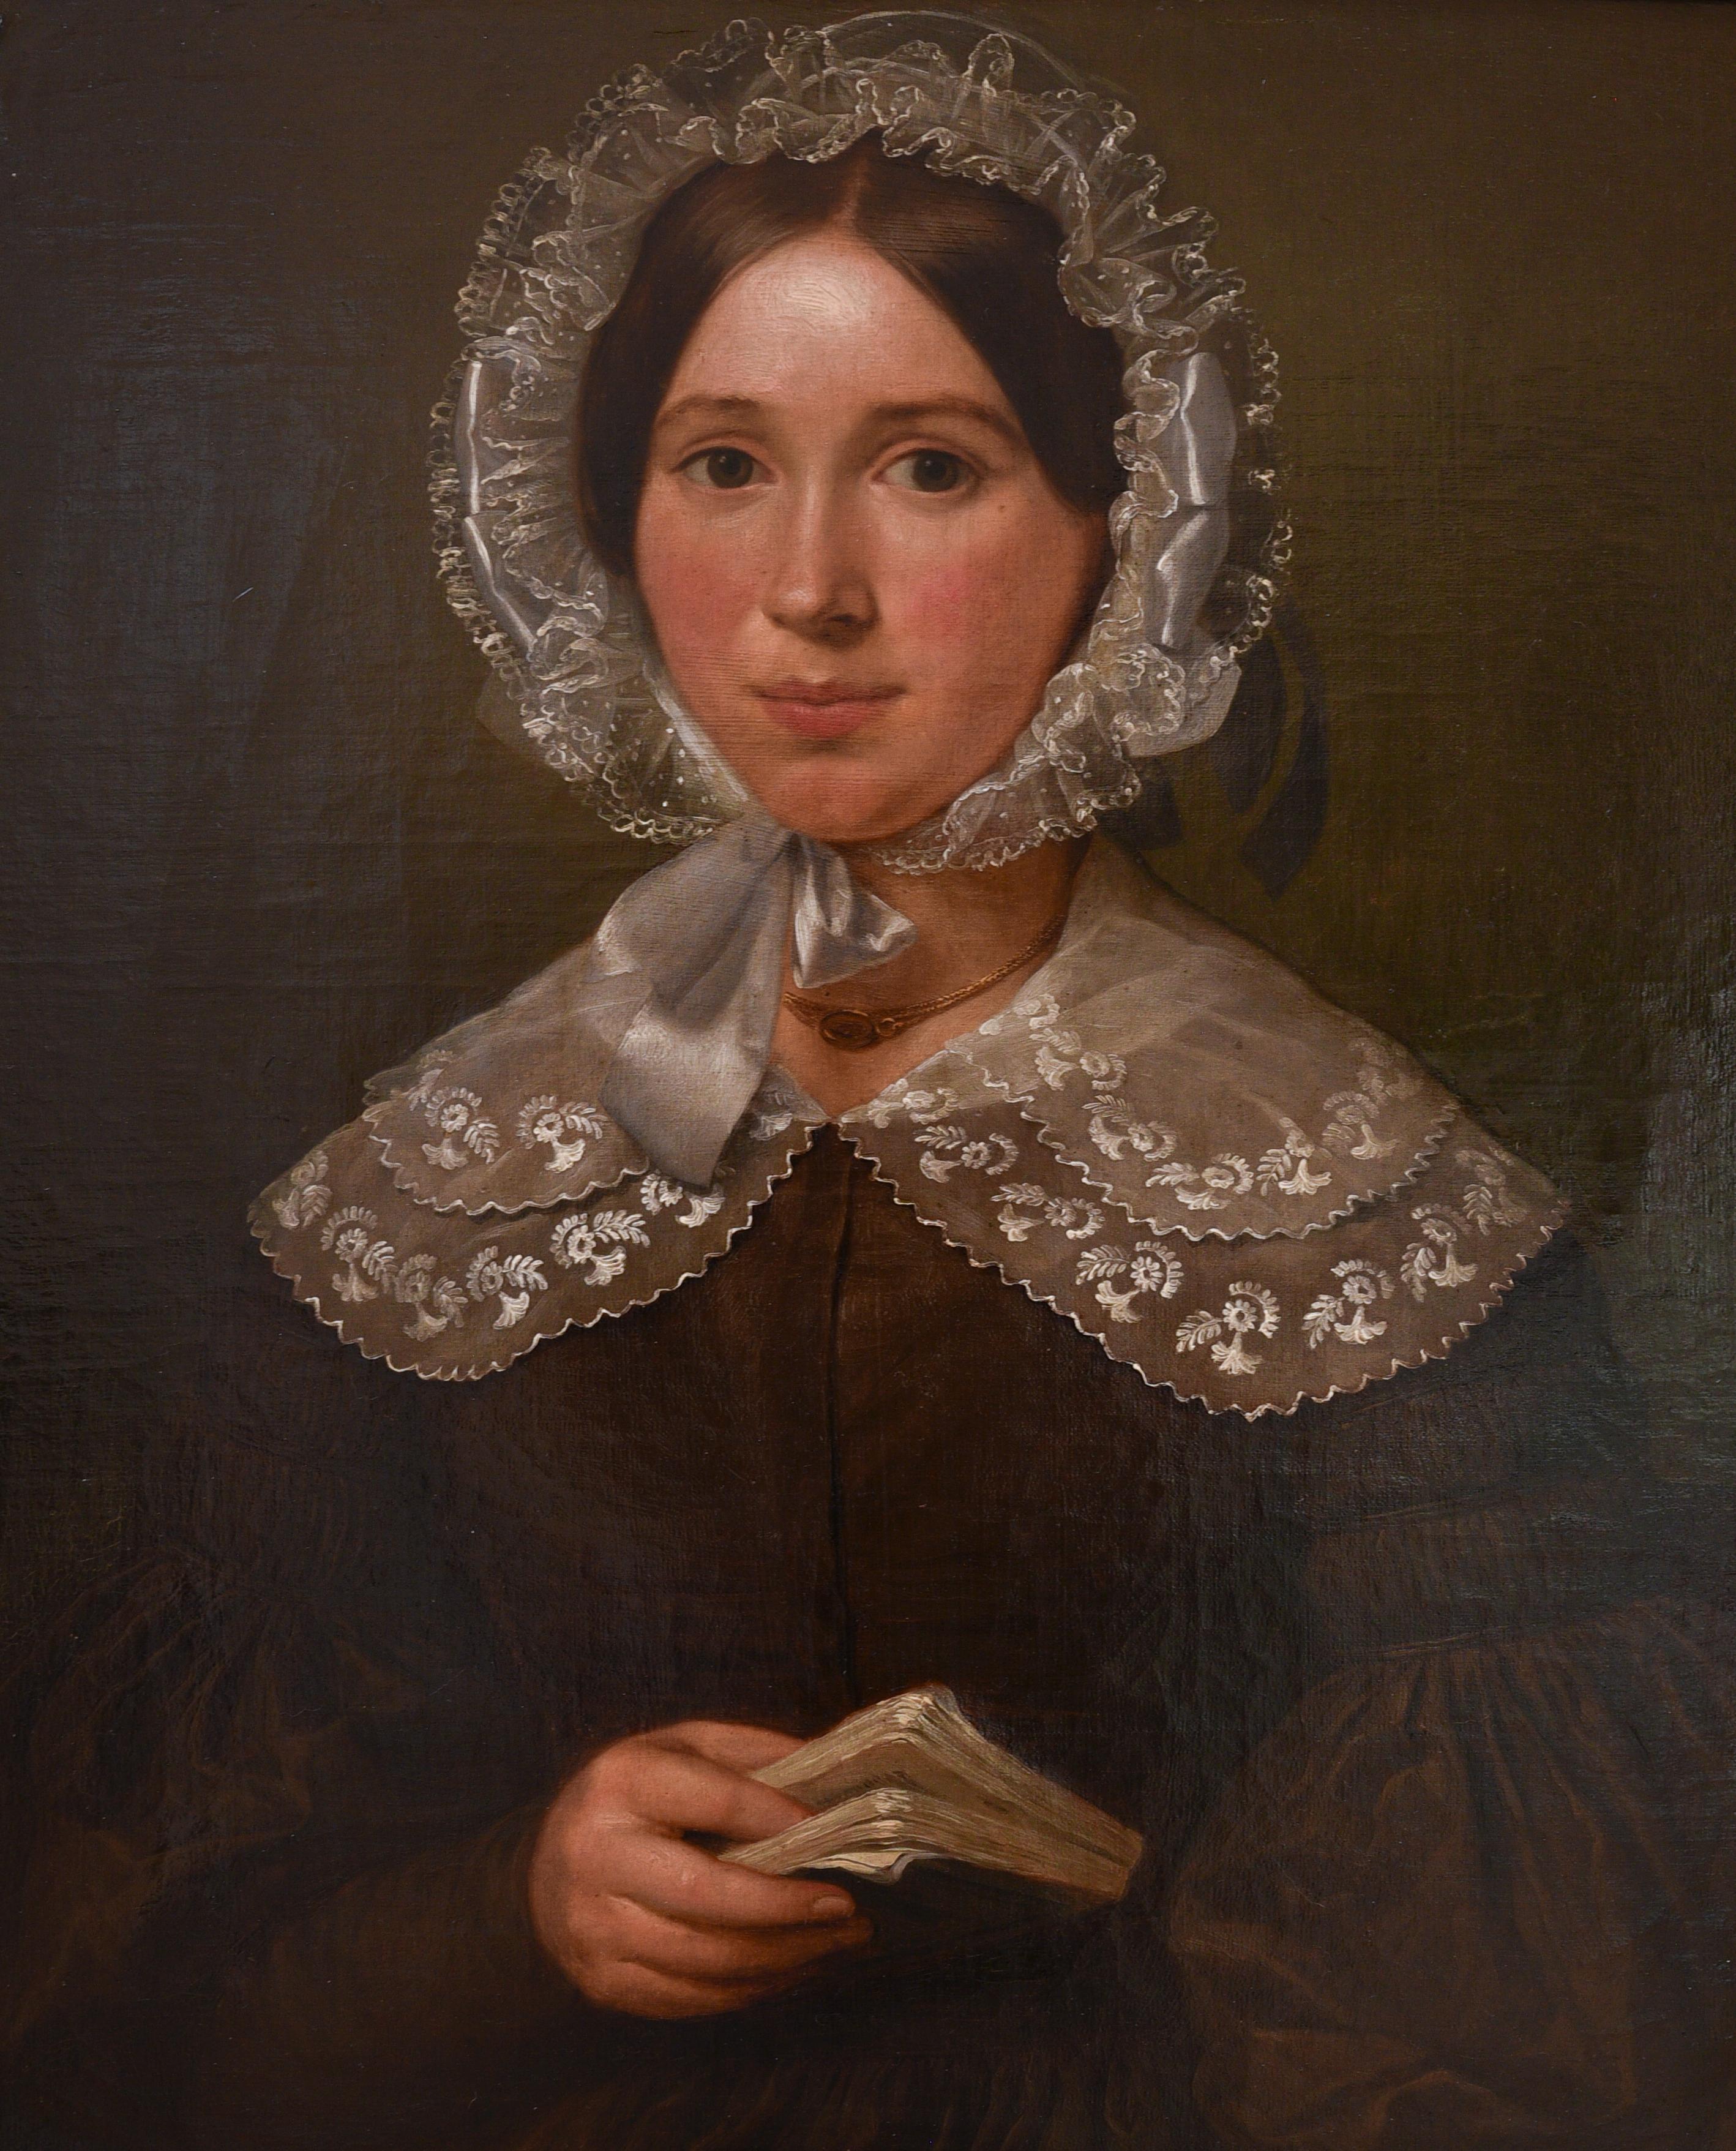 Unsigned oil on board painting painting of a 19th century woman holding a book and dressed with a lace hat and collar. The level of detail in the lace is of the highest quality and so is the expression of the face. 

We believe the painting